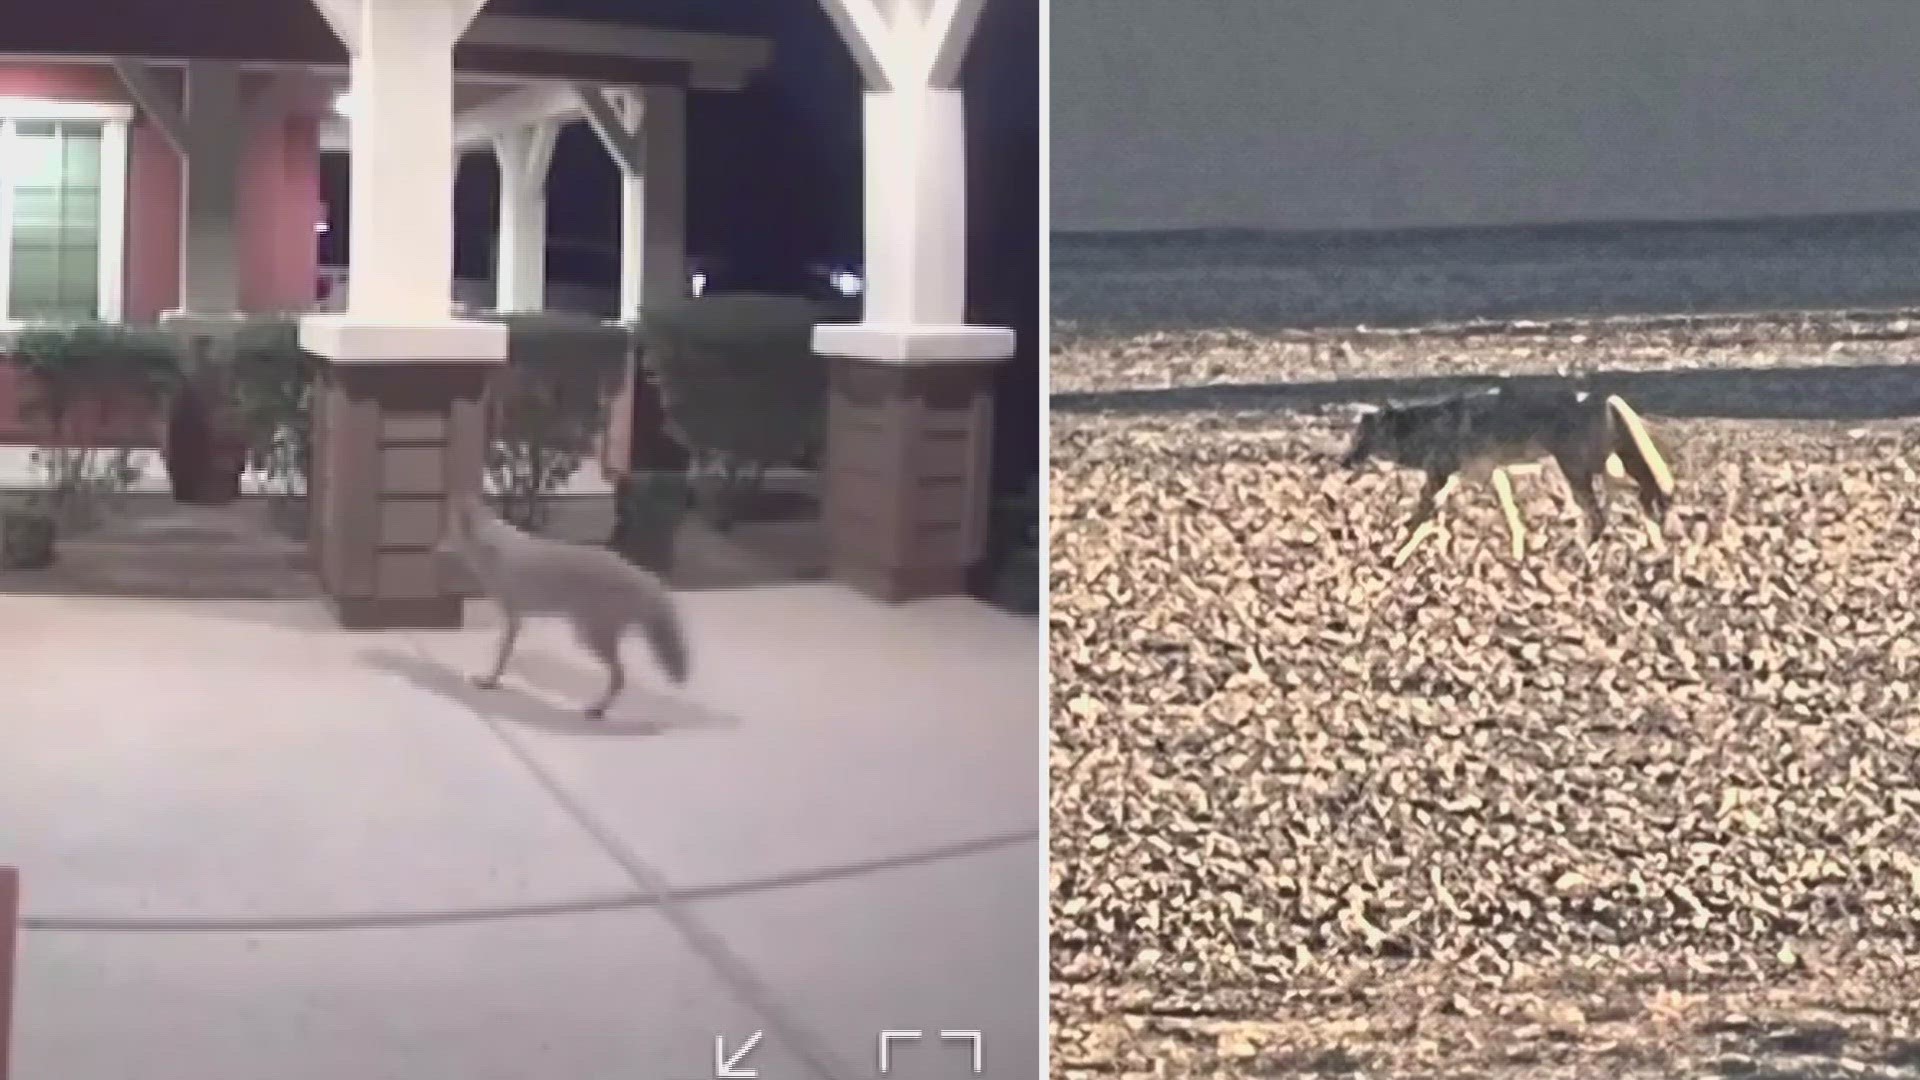 A coyote in Mesa bit a child this morning. The Mesa Police Department shot and killed the coyote following the incident.